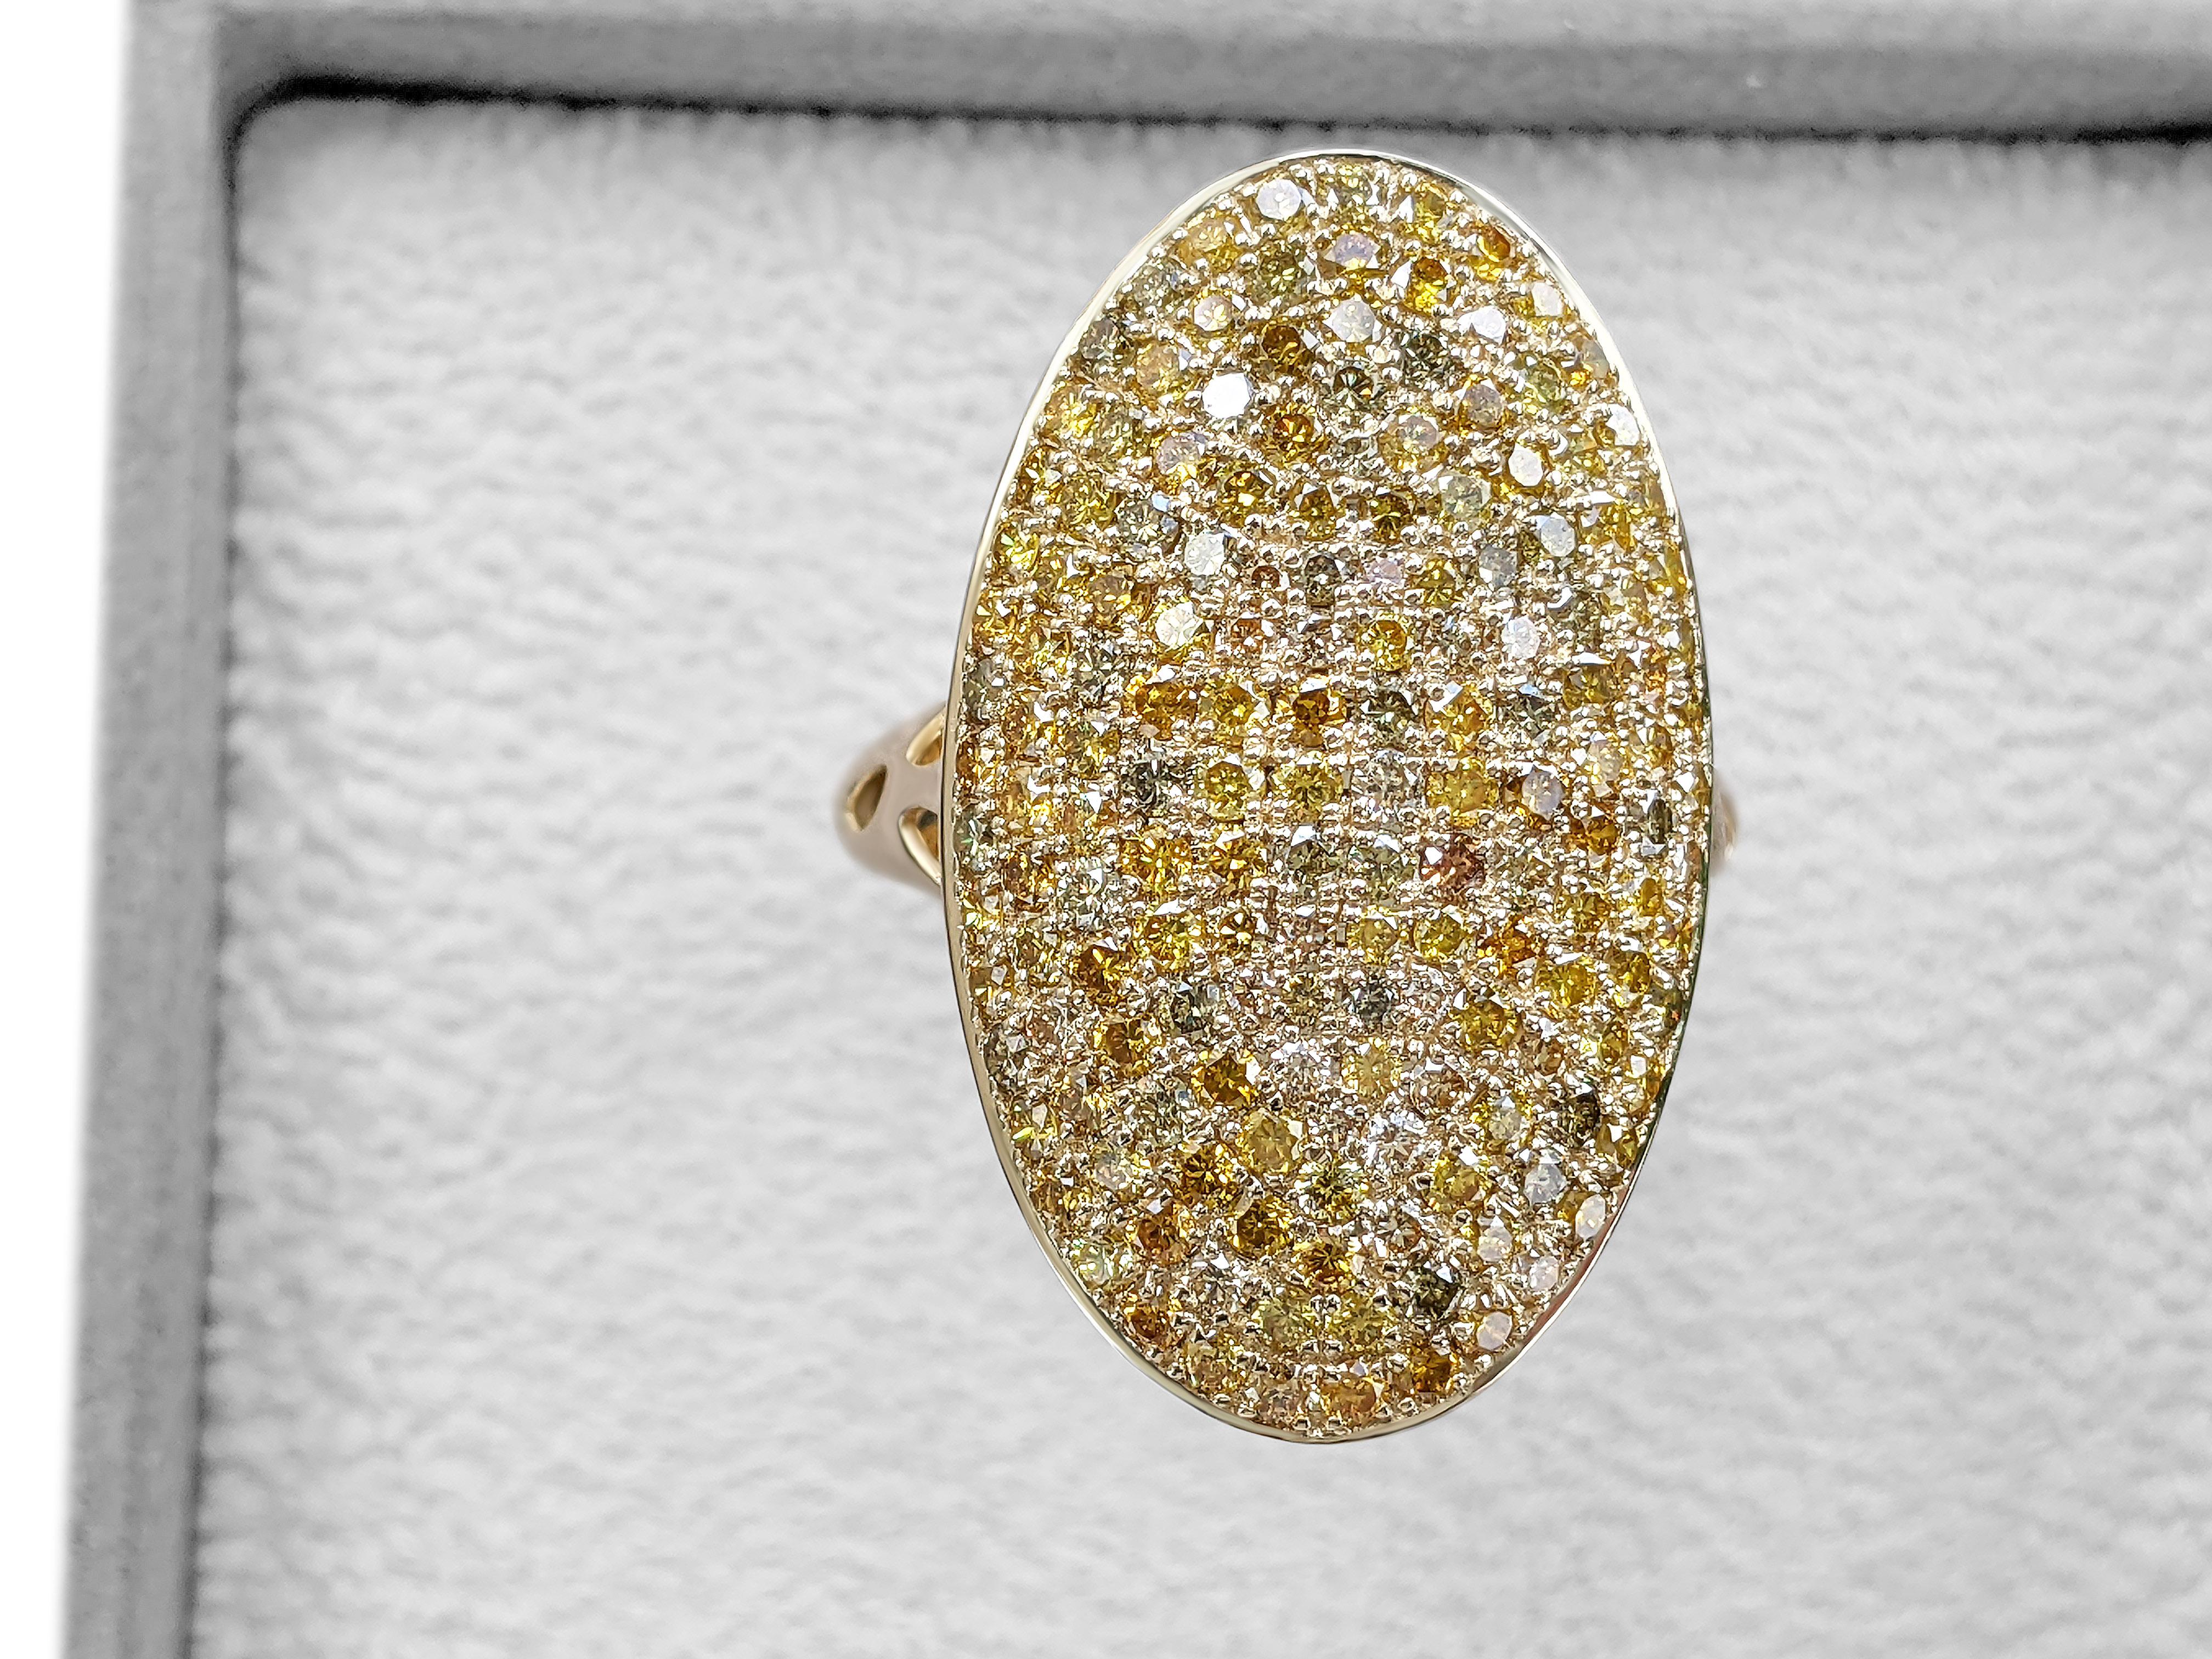 Women's $1 NO RESERVE - 2.22 Carat Fancy Diamond Dome, 14kt Yellow Gold Ring